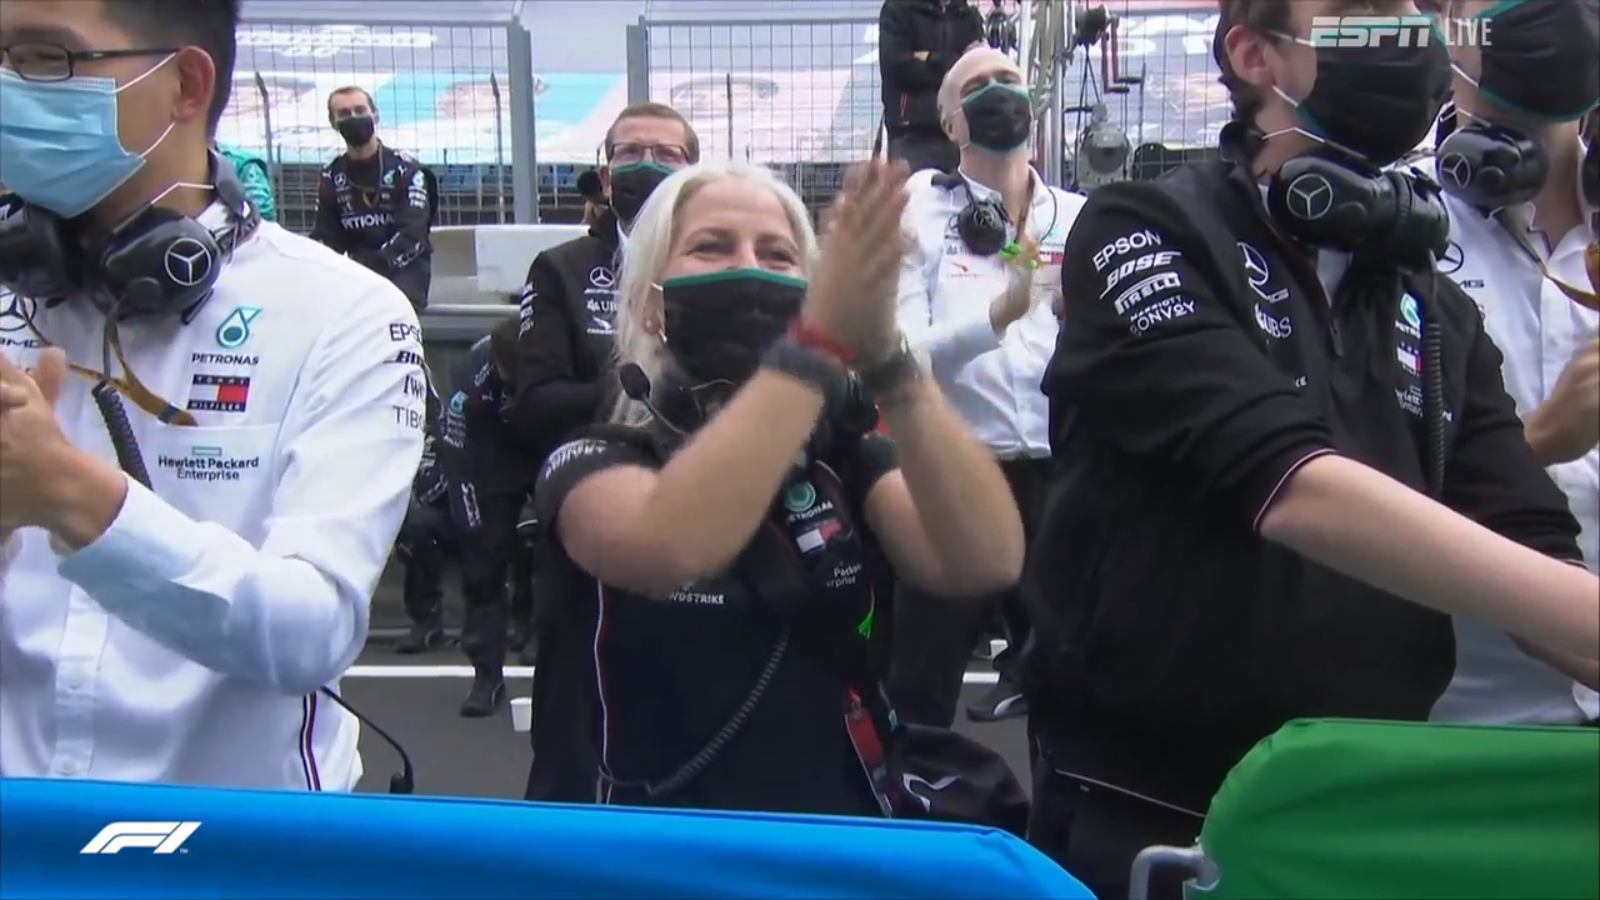 The Mercedes-AMG team celebrates getting both cars on The Podium, in 1st  and 3rd places.